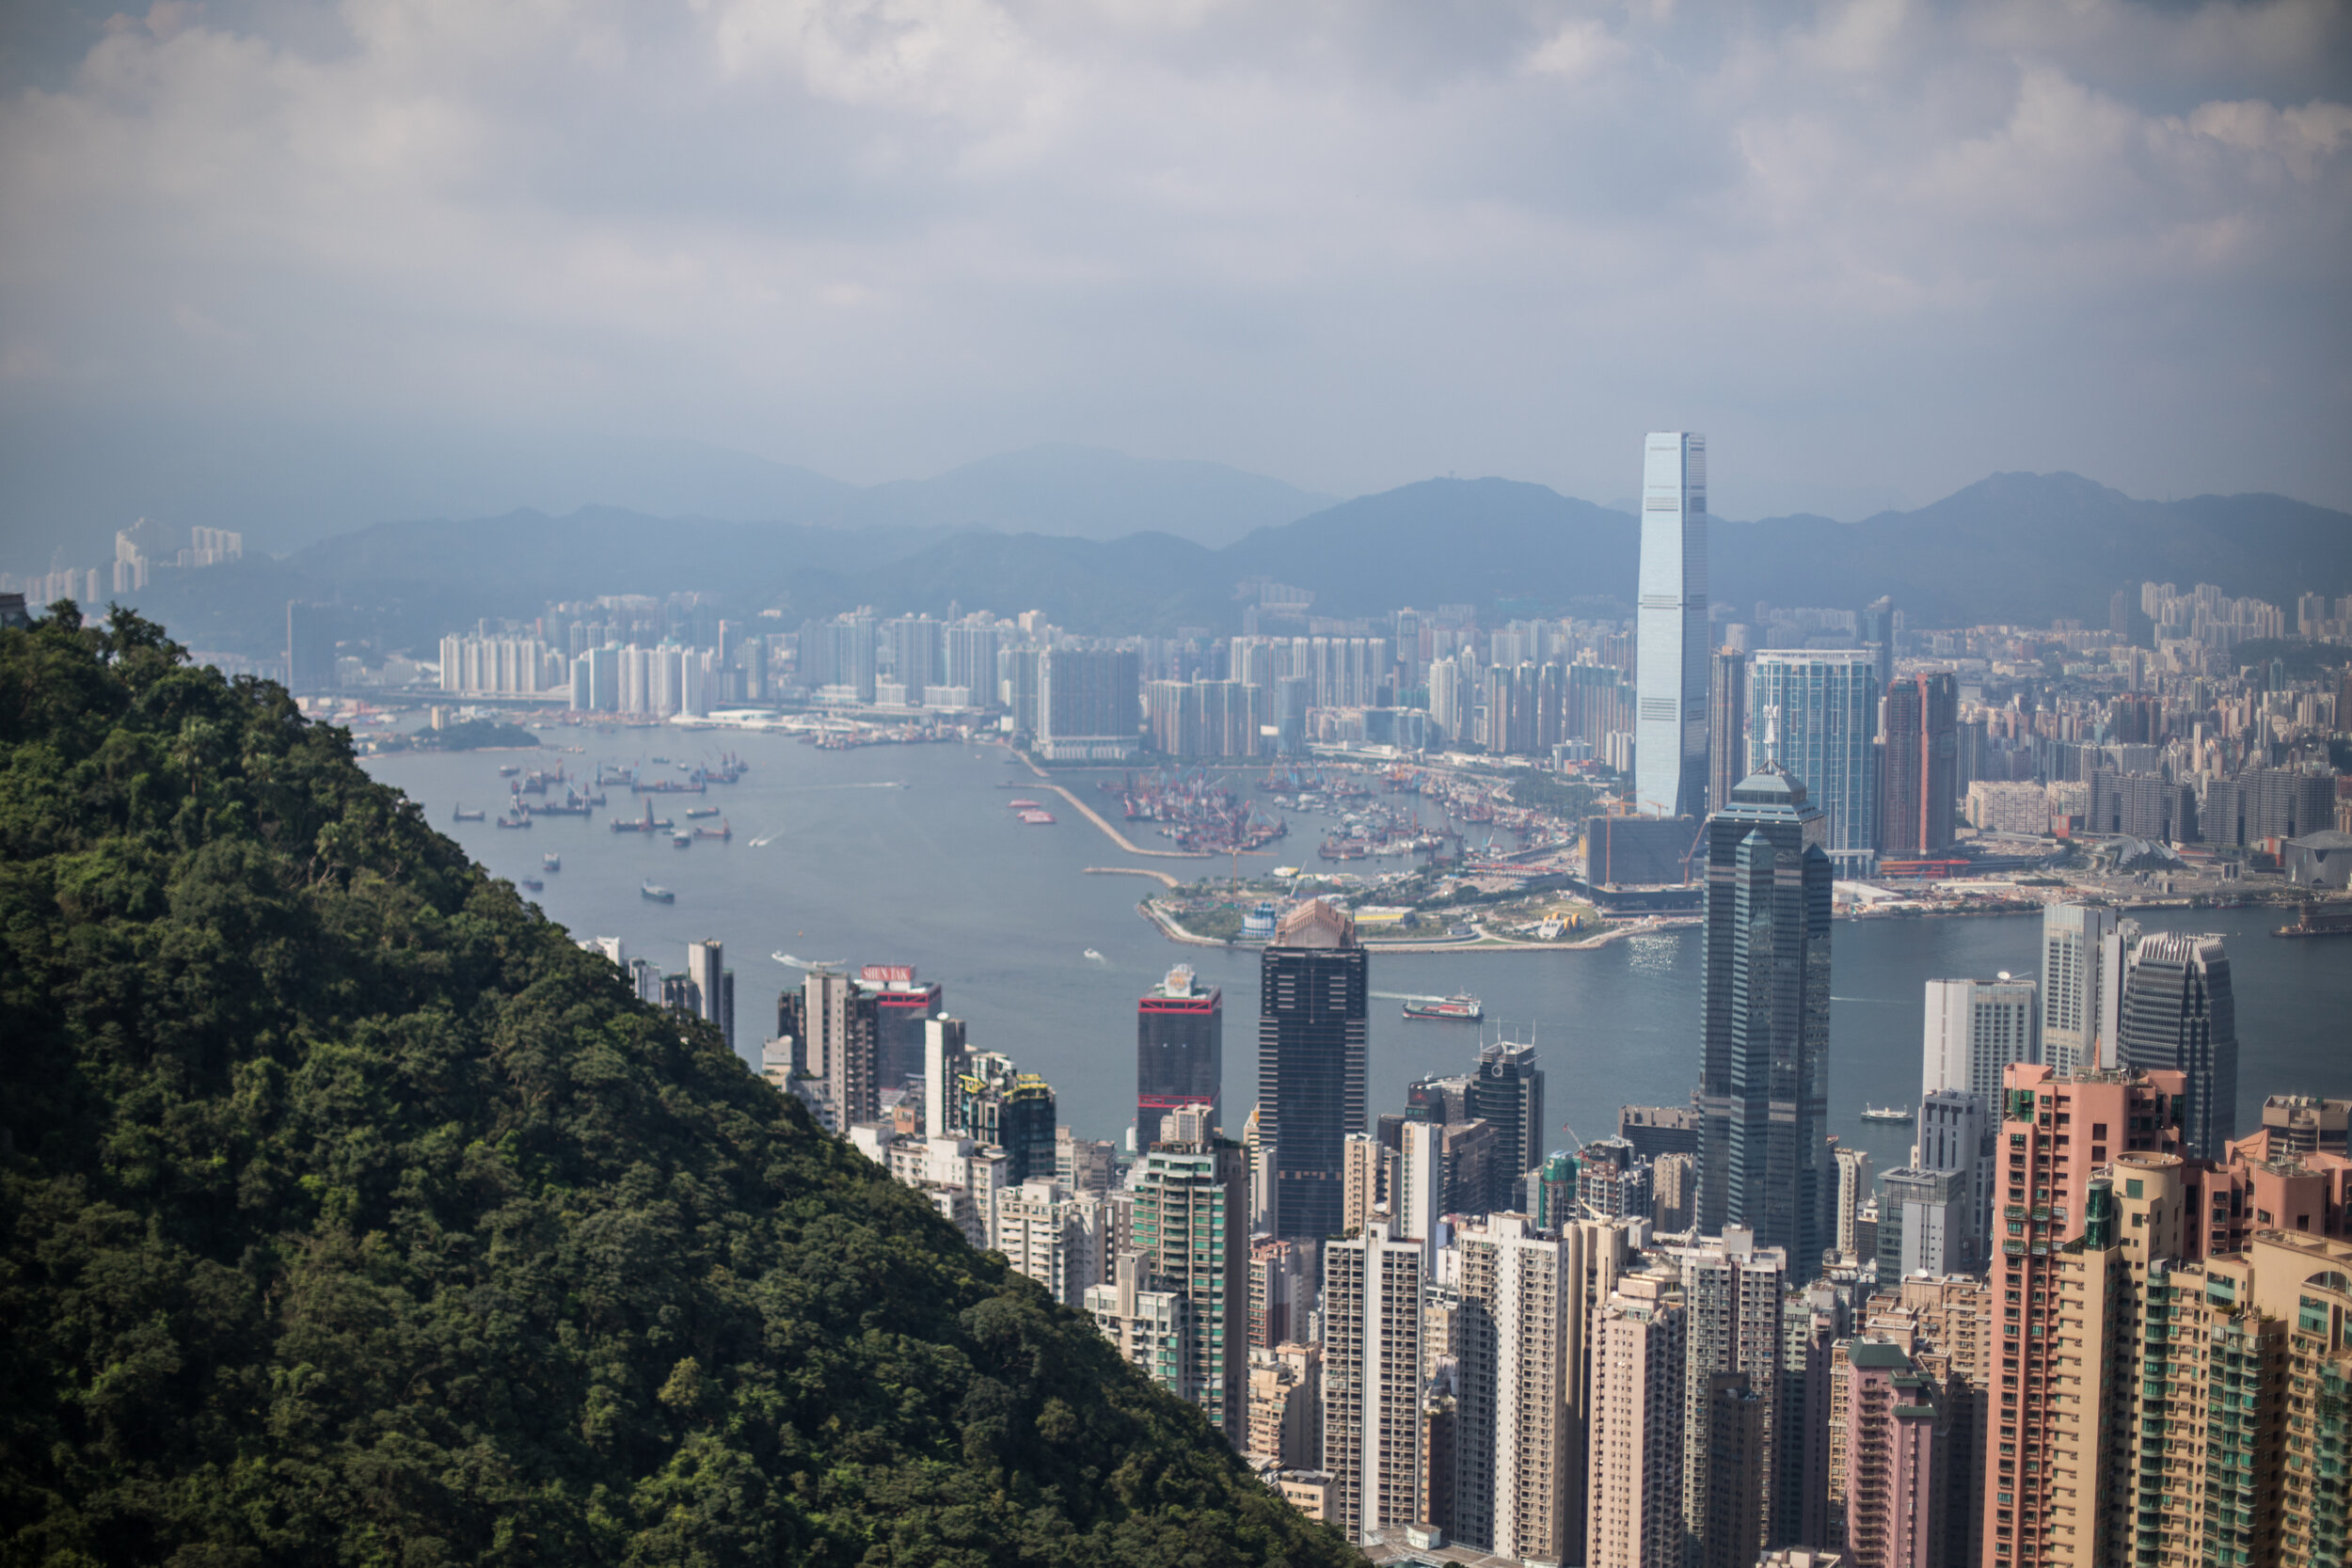 View over Hong Kong by Geraint Rowland